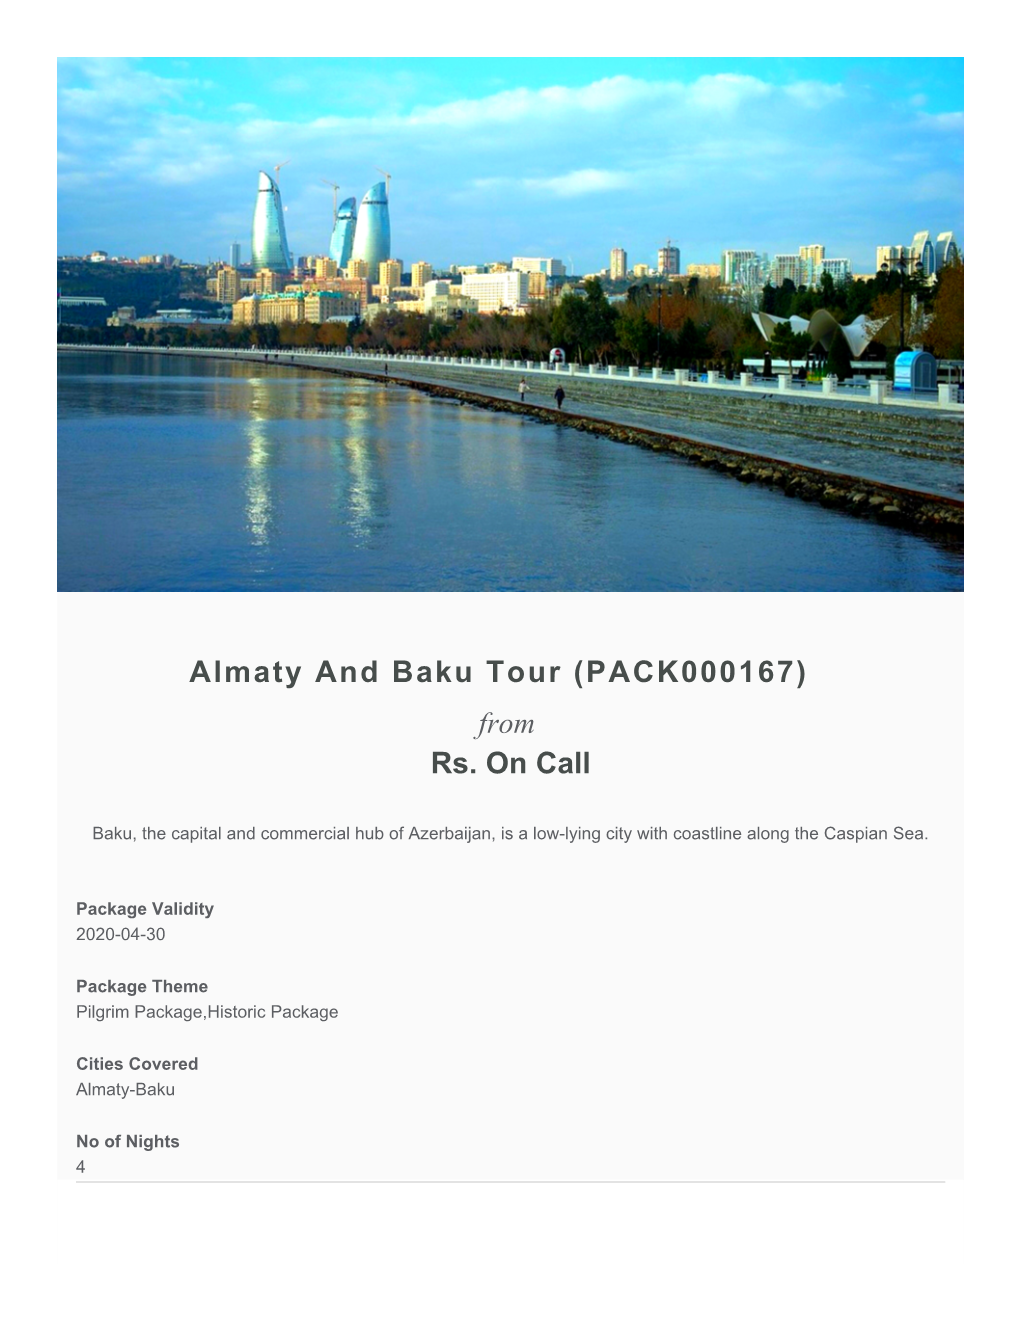 Almaty and Baku Tour (PACK000167) from Rs